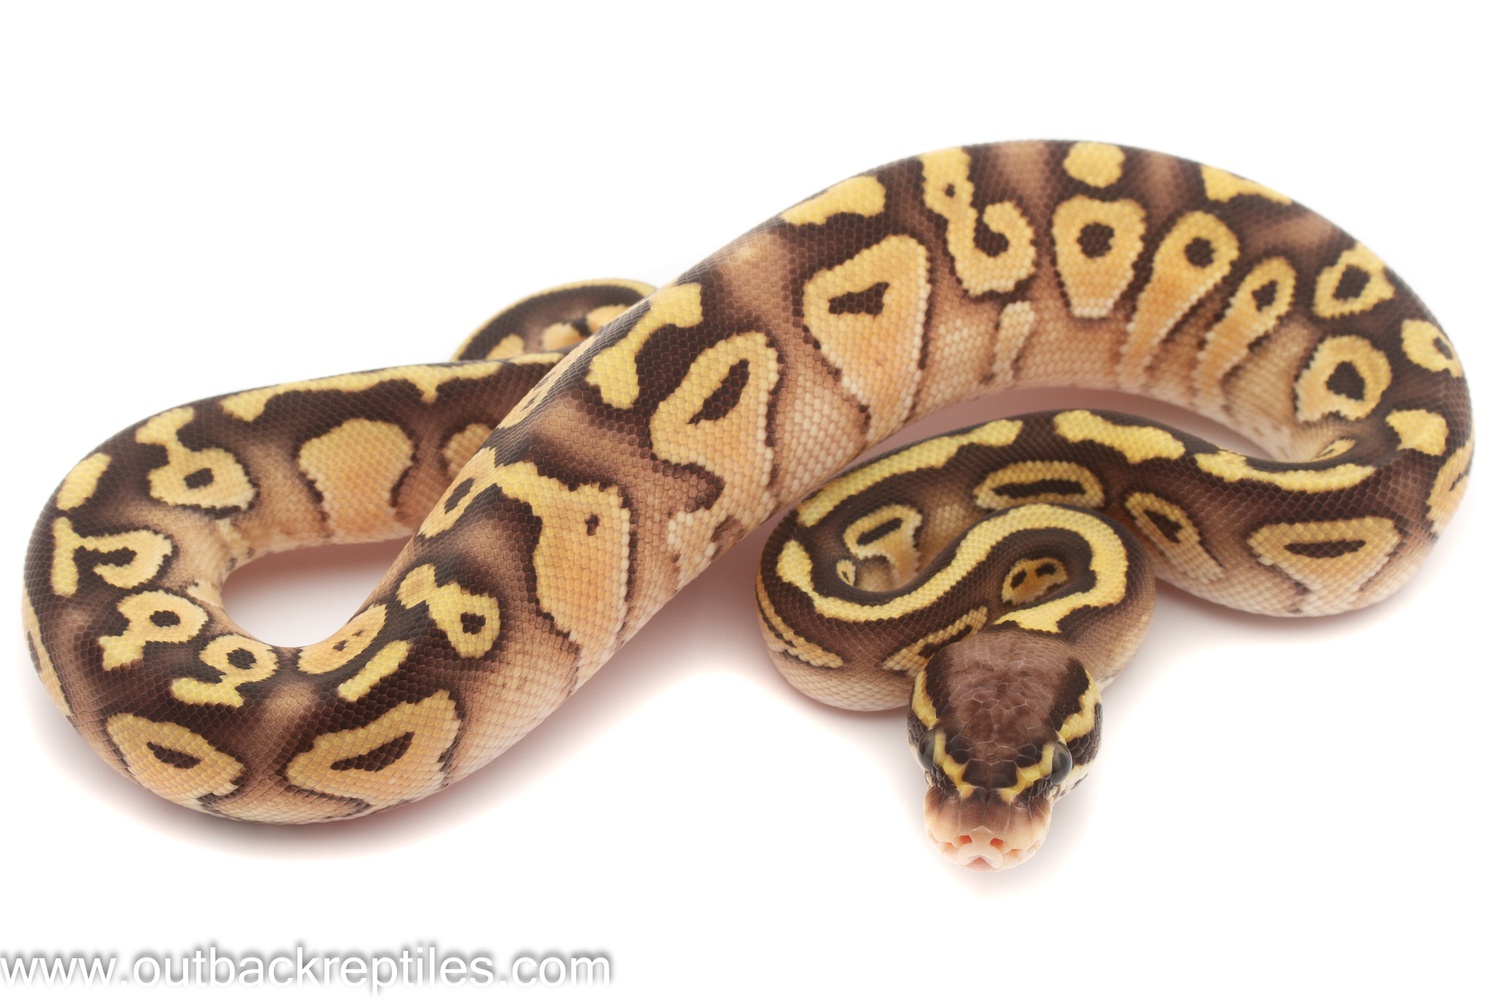 Pastel Lesser Red Stripe Ball Python by Outback Reptiles